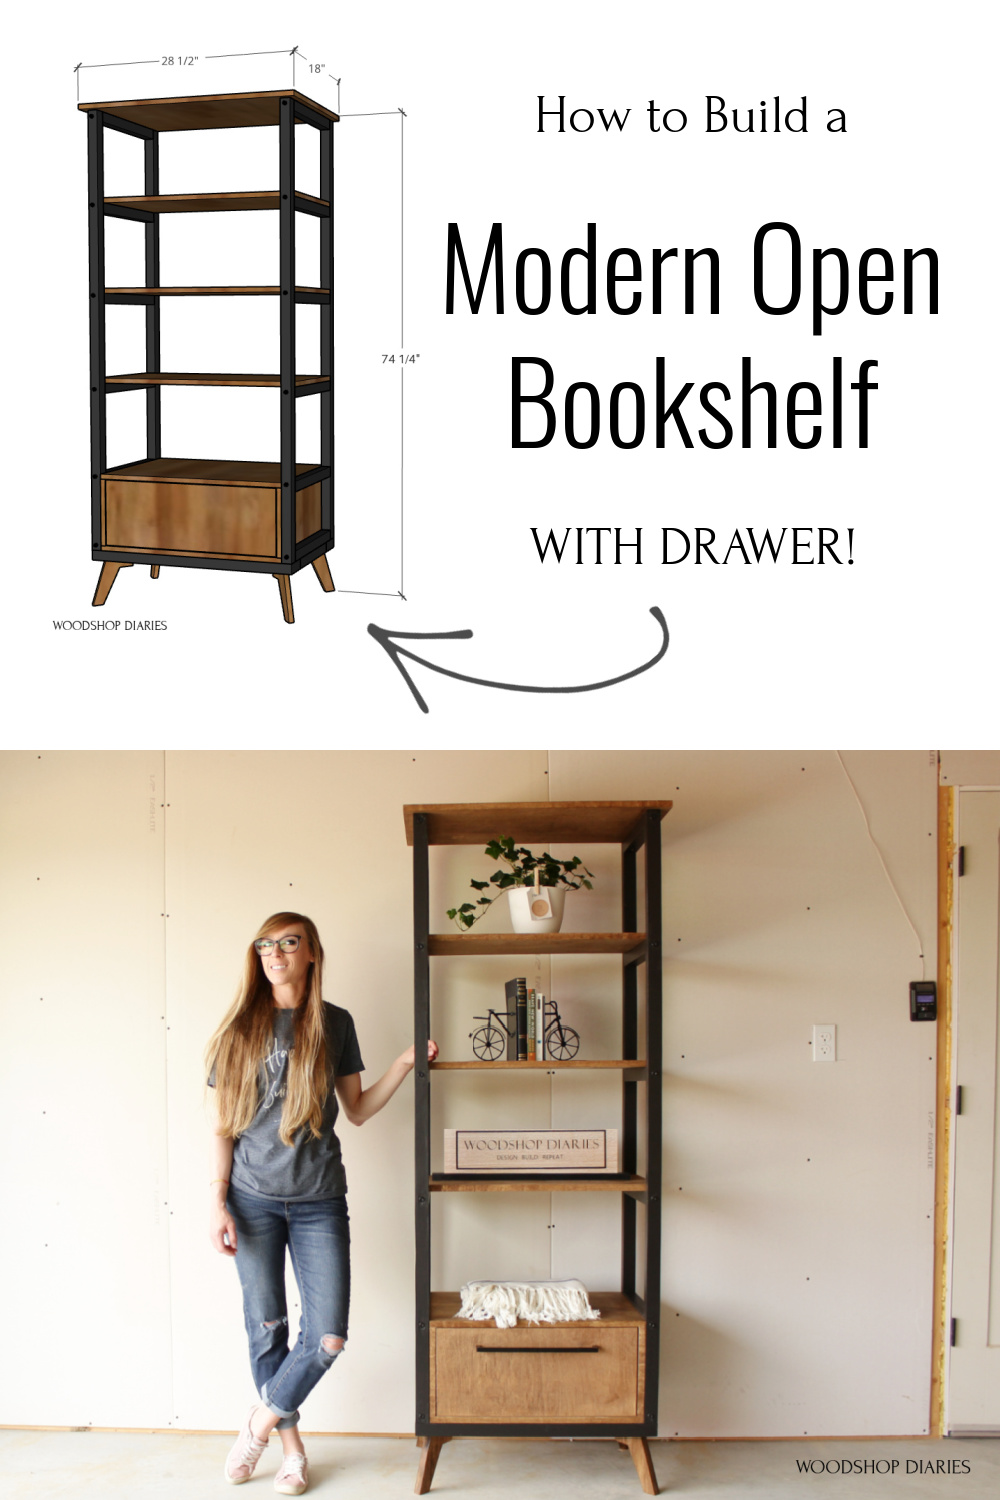 Pinterest diagram showing overall dimensional diagram at top and shara with bookshelf at bottom with text "how to build a modern open bookshelf with drawer"